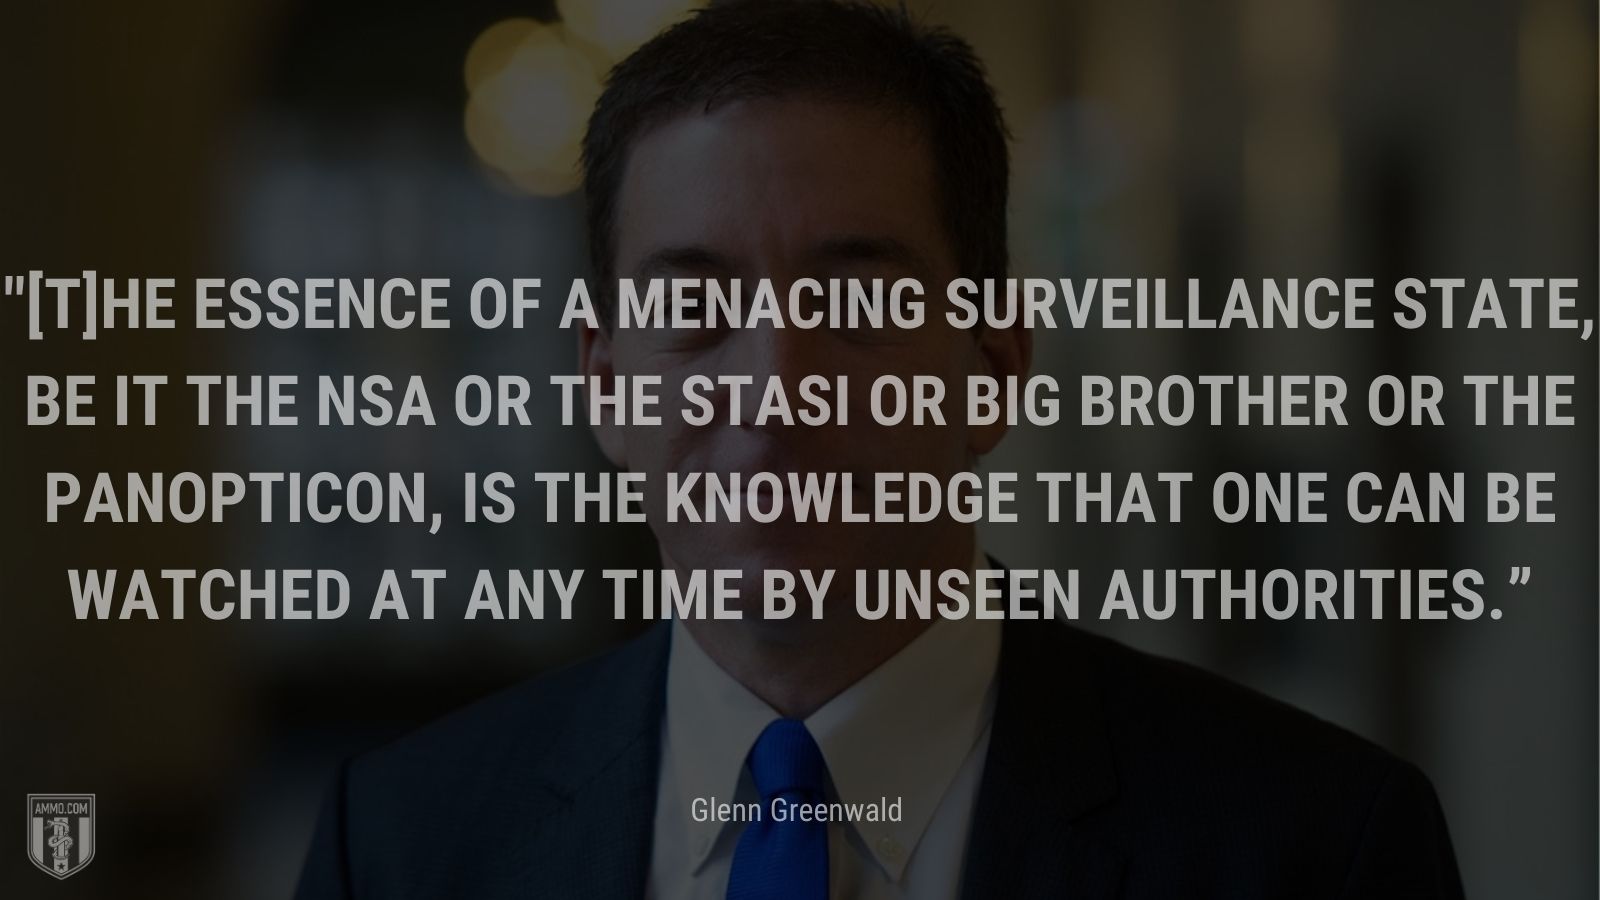 “[T]he essence of a menacing surveillance state, be it the NSA or the Stasi or Big Brother or the Panopticon, is the knowledge that one can be watched at any time by unseen authorities.” - Glenn Greenwald